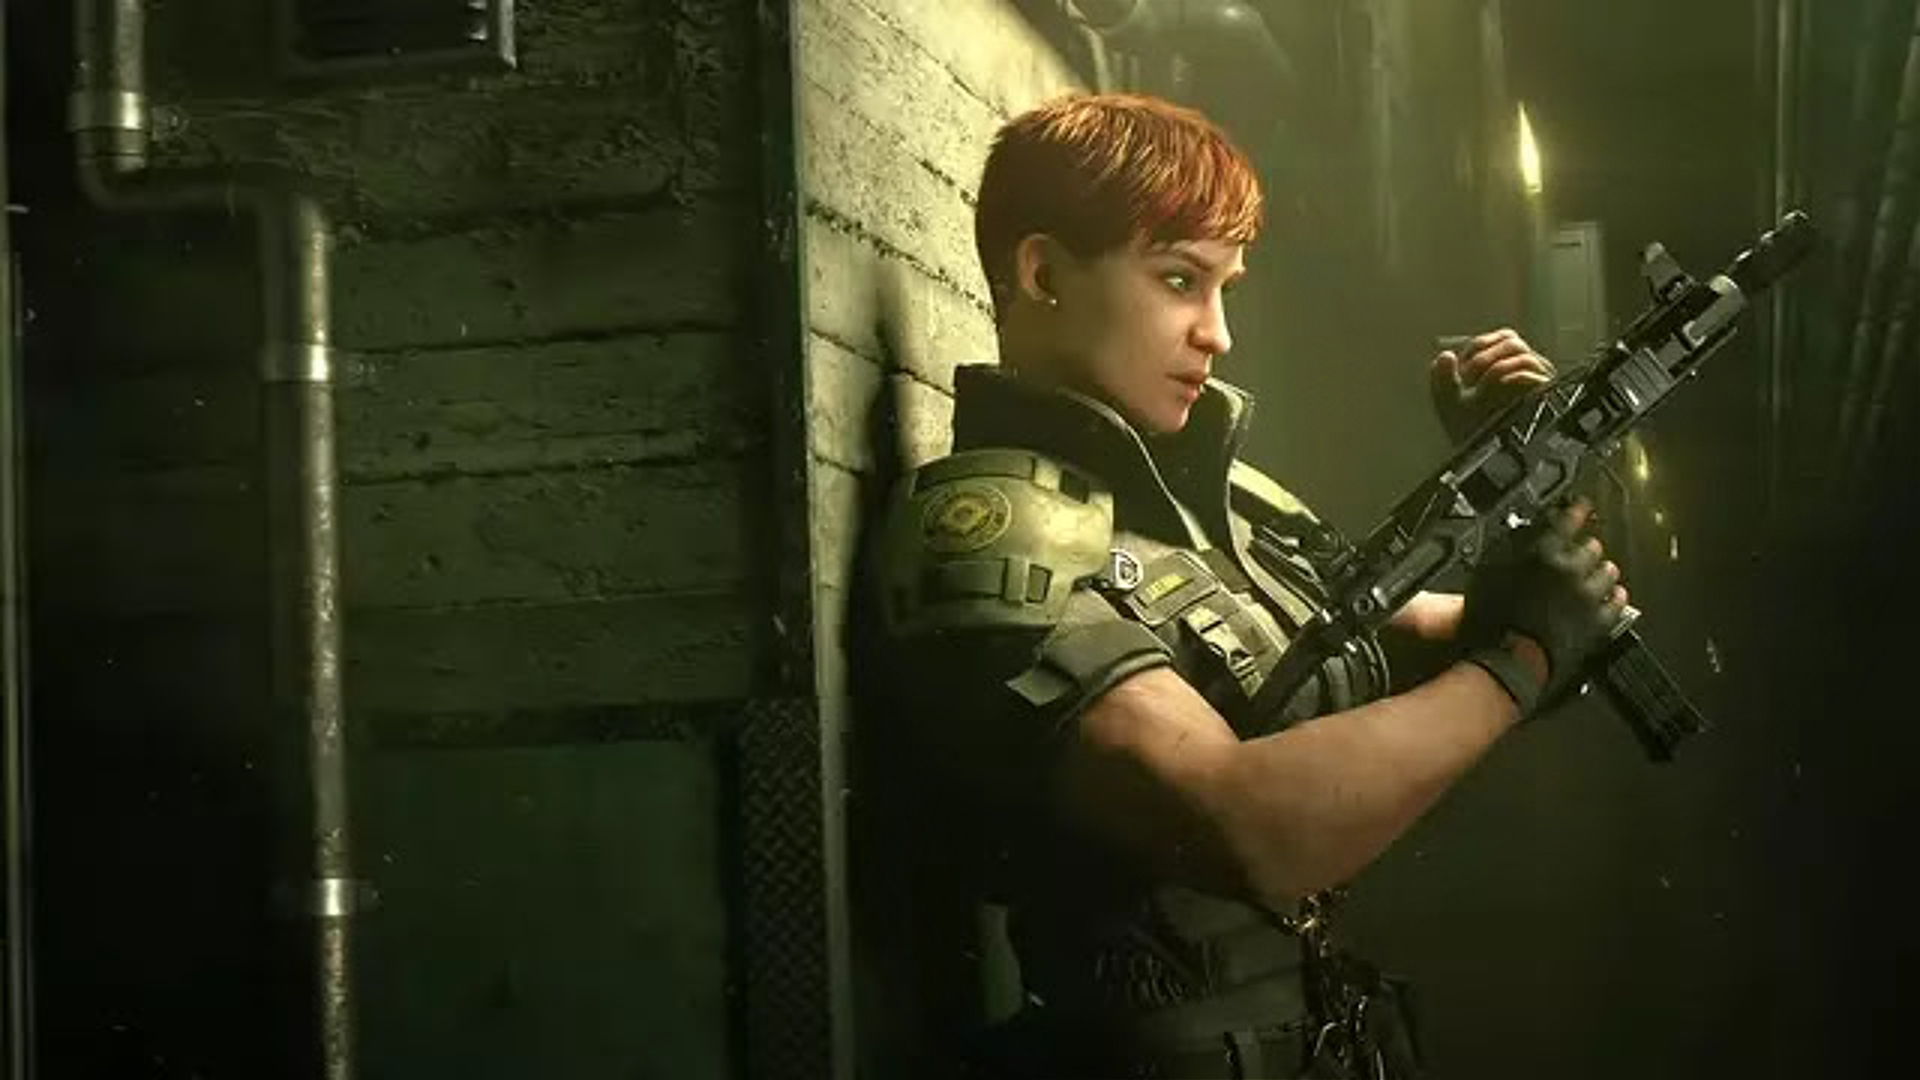 A short-haired woman wearing military gear and standing against a wall with gun in hand